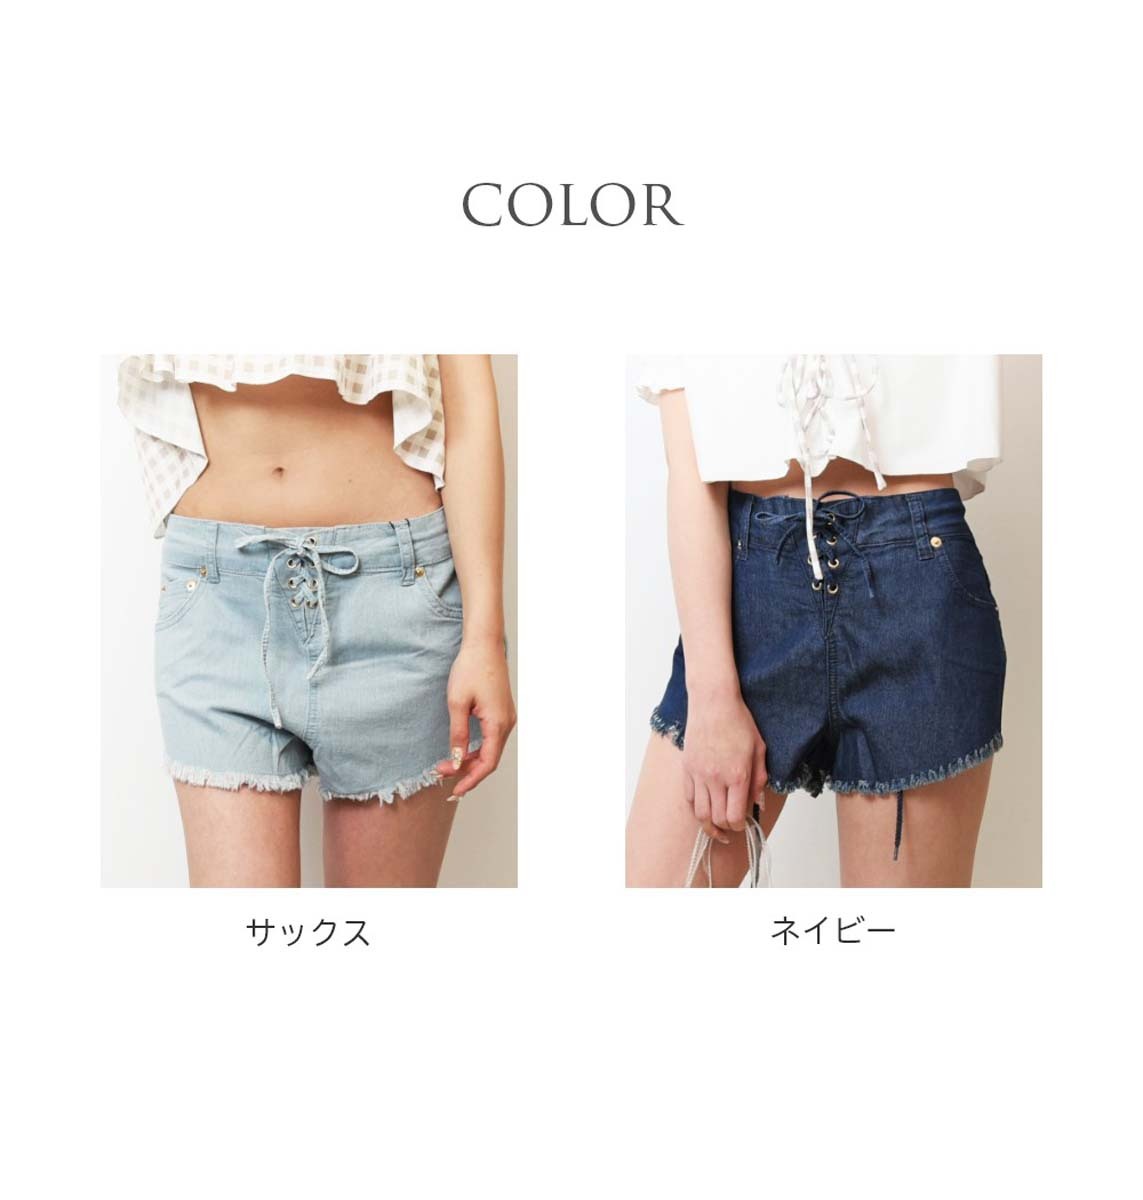  free shipping water land both for race up water Denim pants lady's for women swimsuit Layered lovely p short pants SLM SRT/LRG